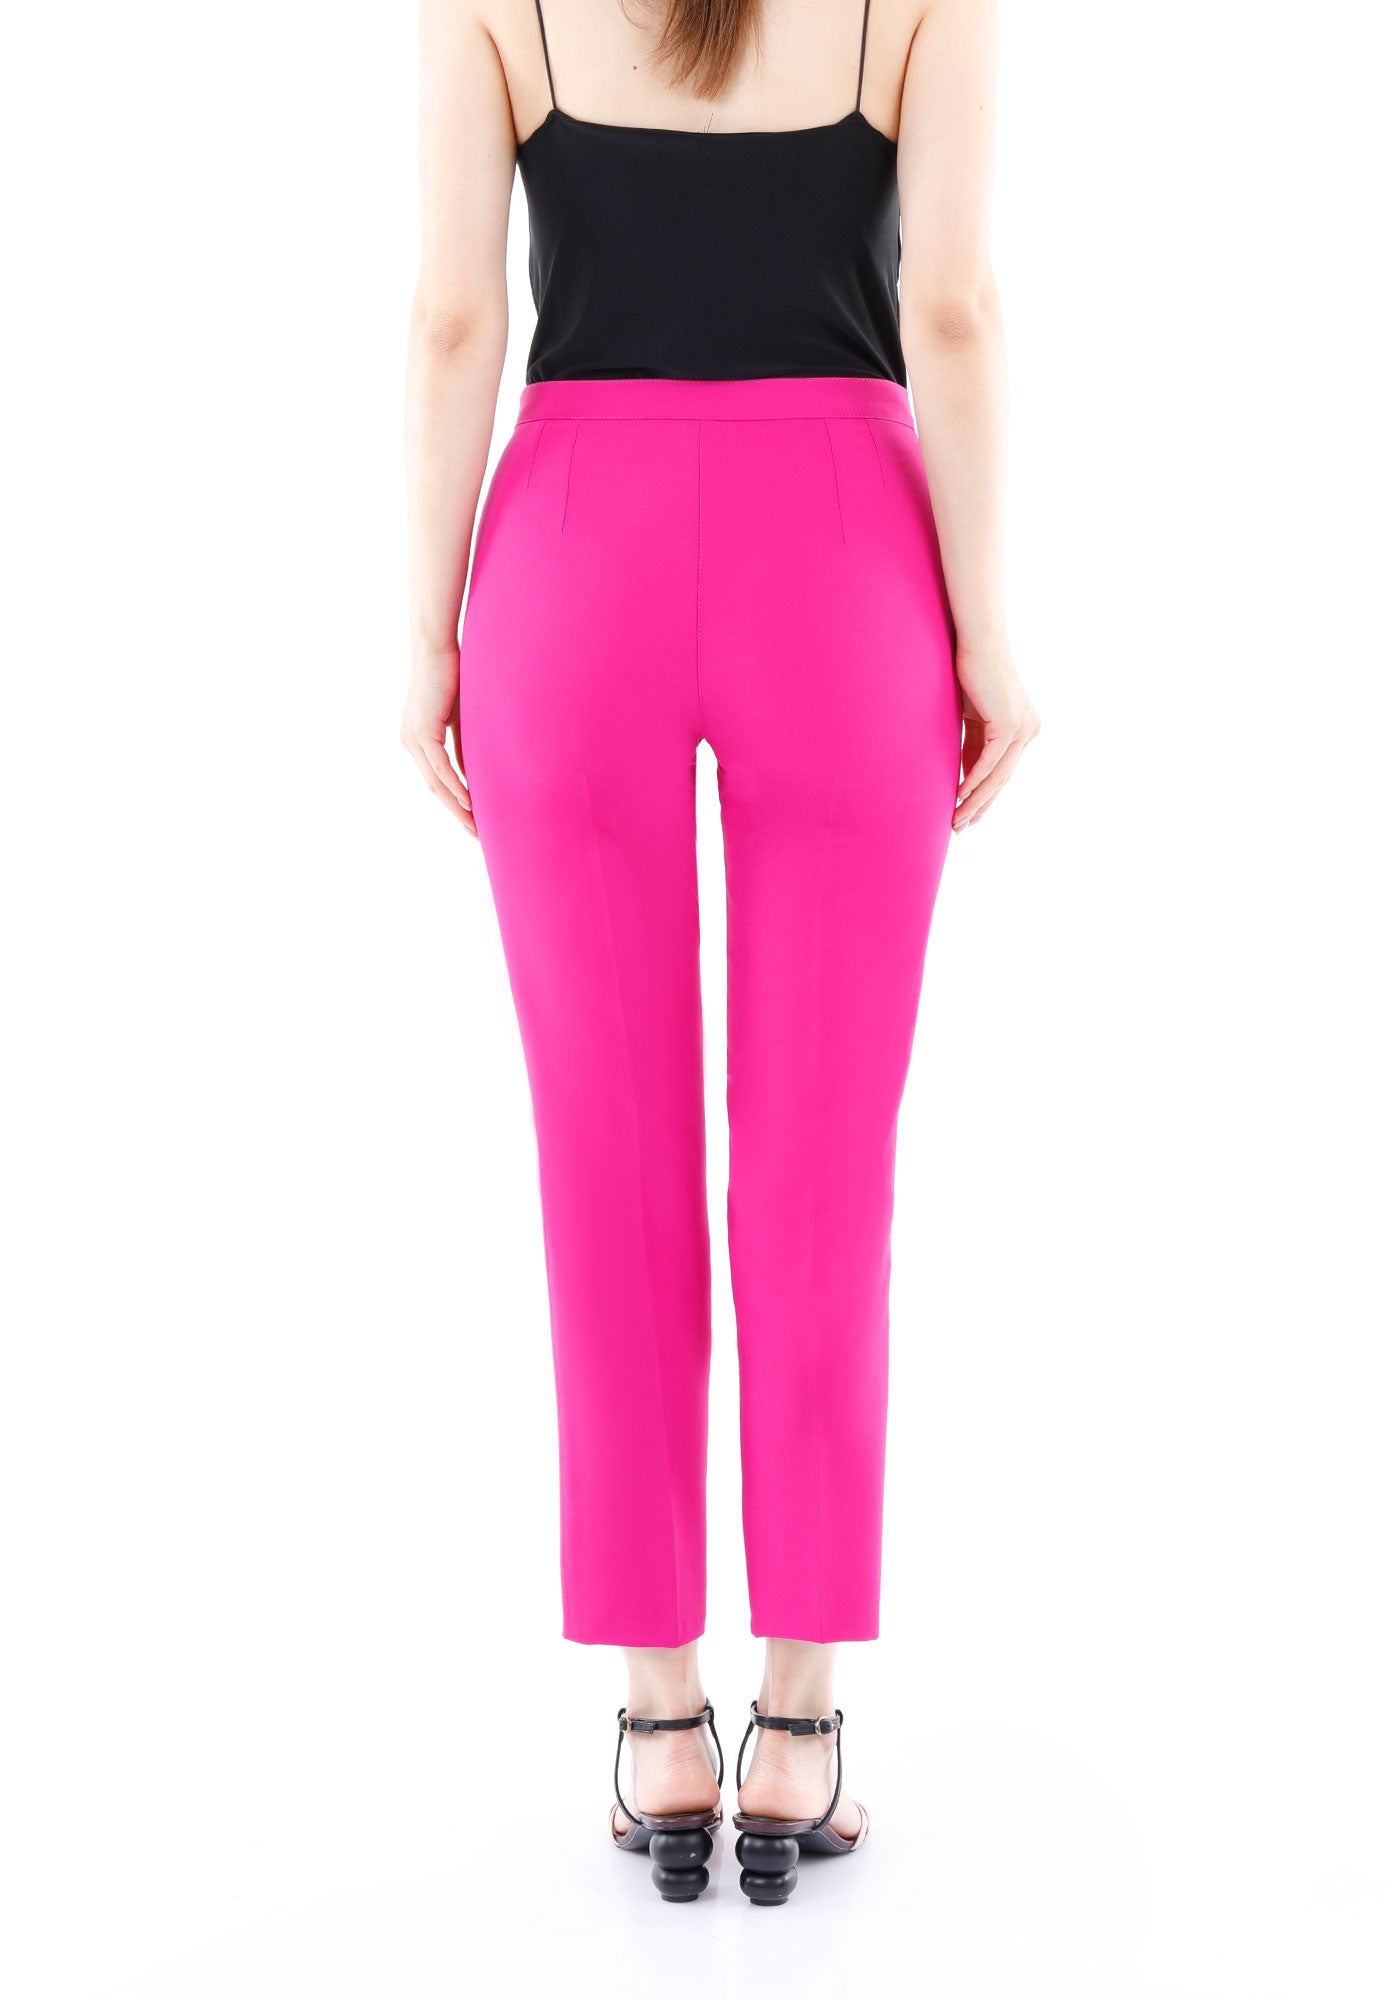 Copy of Green Ankle-Length Slim-Fit/Skinny Pants for Women G-Line